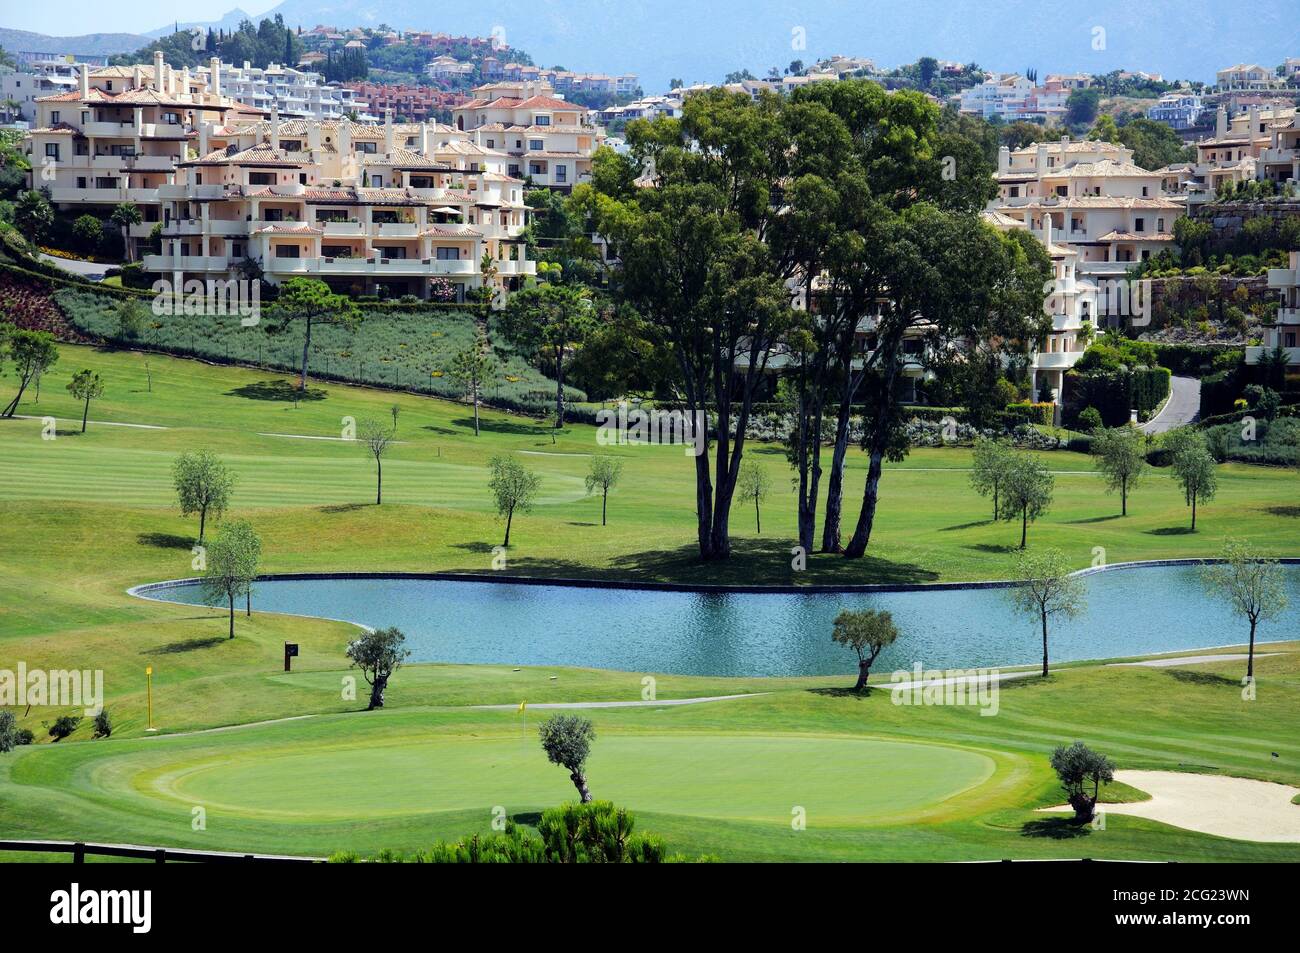 View across the lake at El Higueral Golf Course with apartments to the rear, Benahavis, Spain Stock Photo -